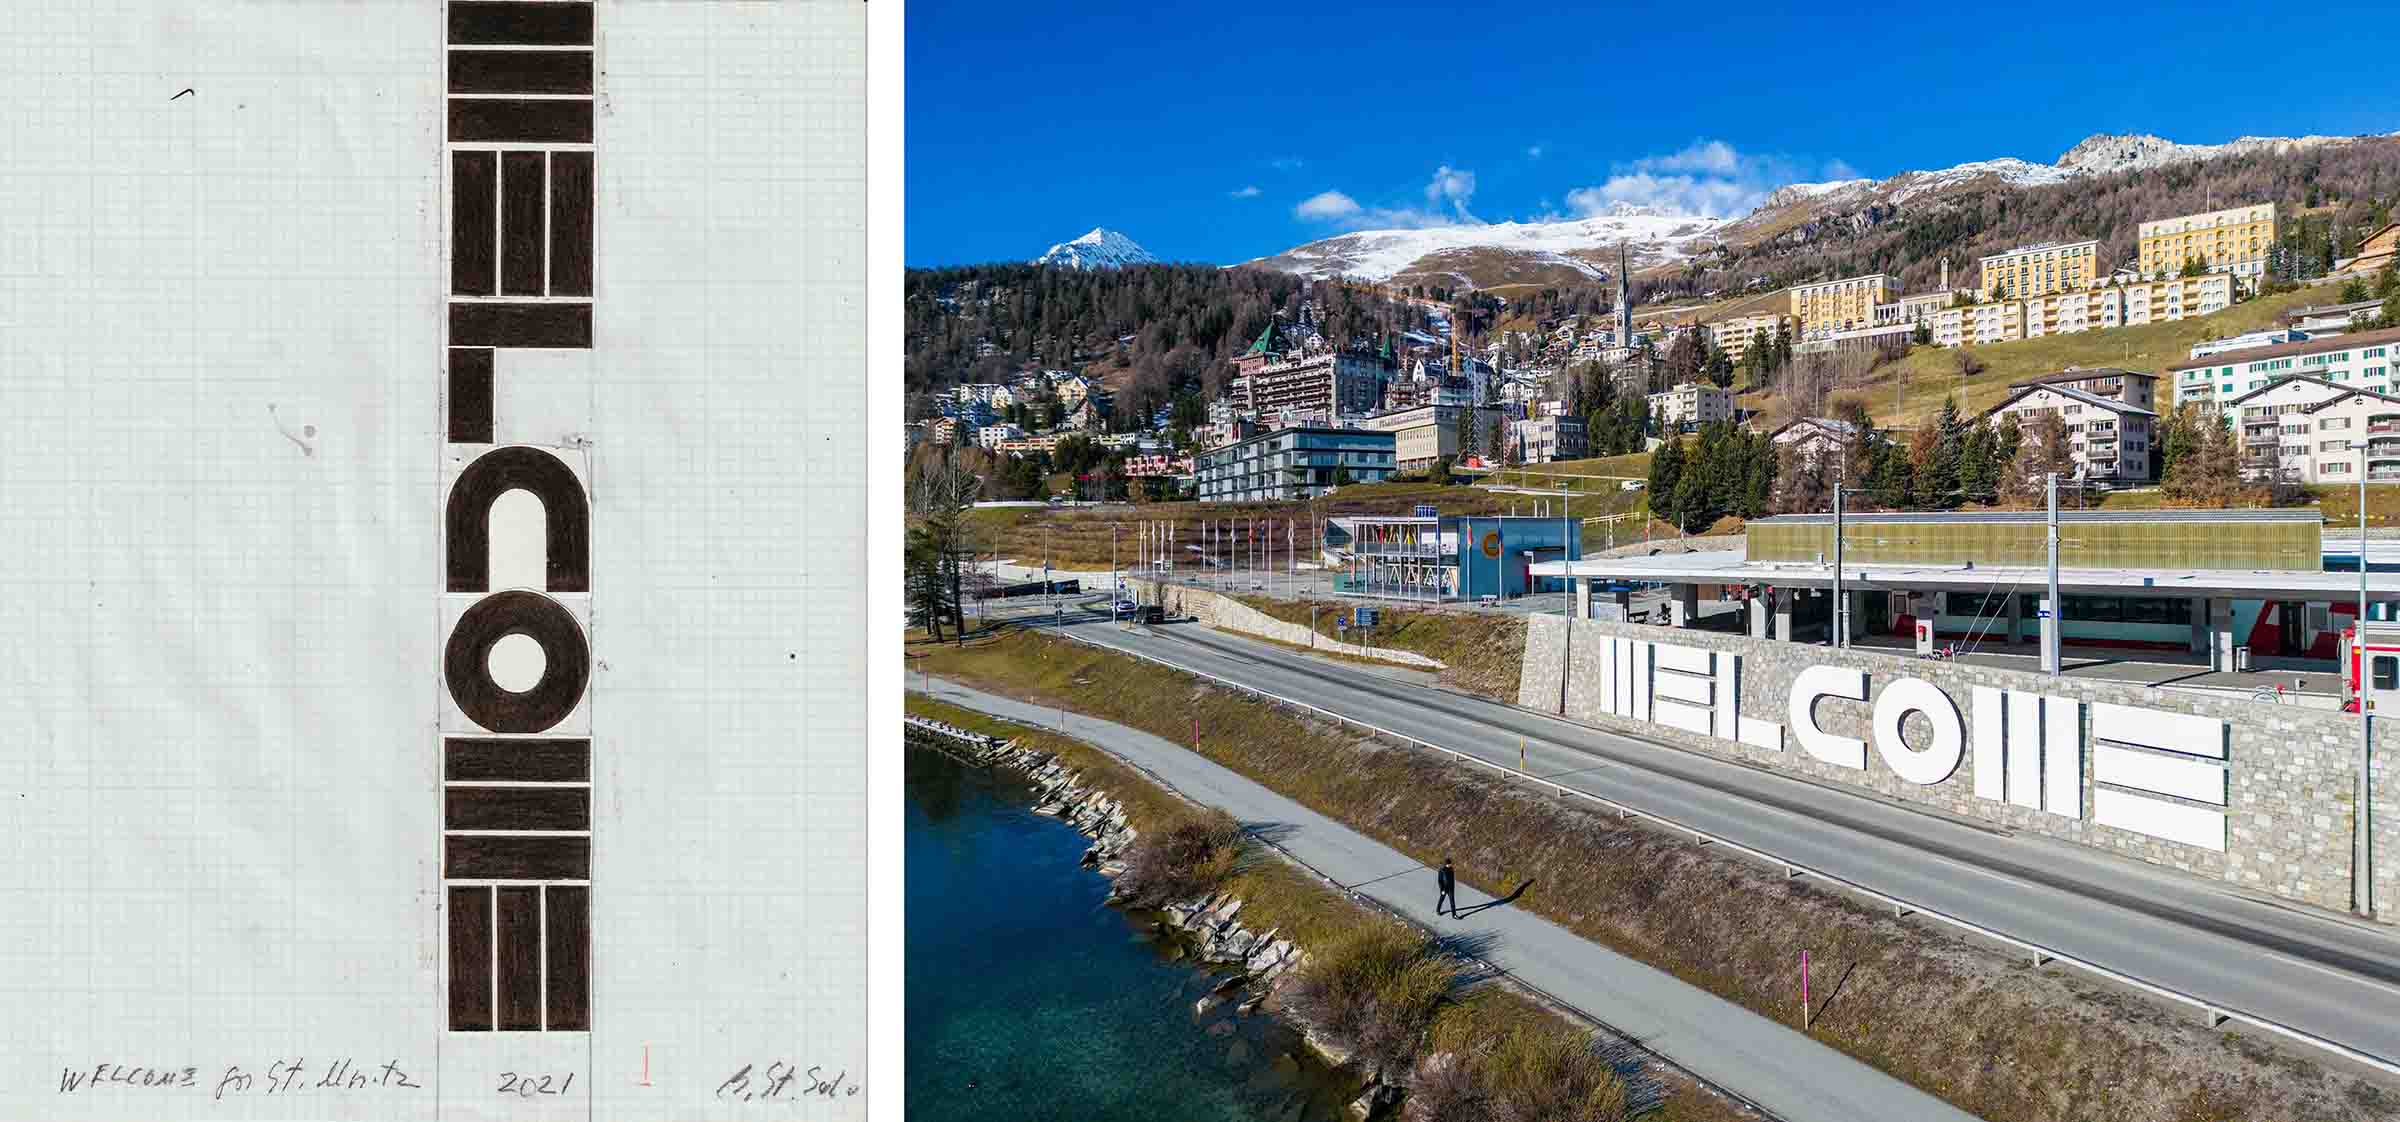 Left: Sketch for Welcome by Barbara Stauffacher Solomon, 2021. Right: Installation view of Barbara Stauffacher Solomon, Welcome, 2022, in St. Moritz. © fotoswiss by Giancarlo Cattaneo. Drone image with permission from Airport Samedan. Both images courtesy of the artist and von Bartha.